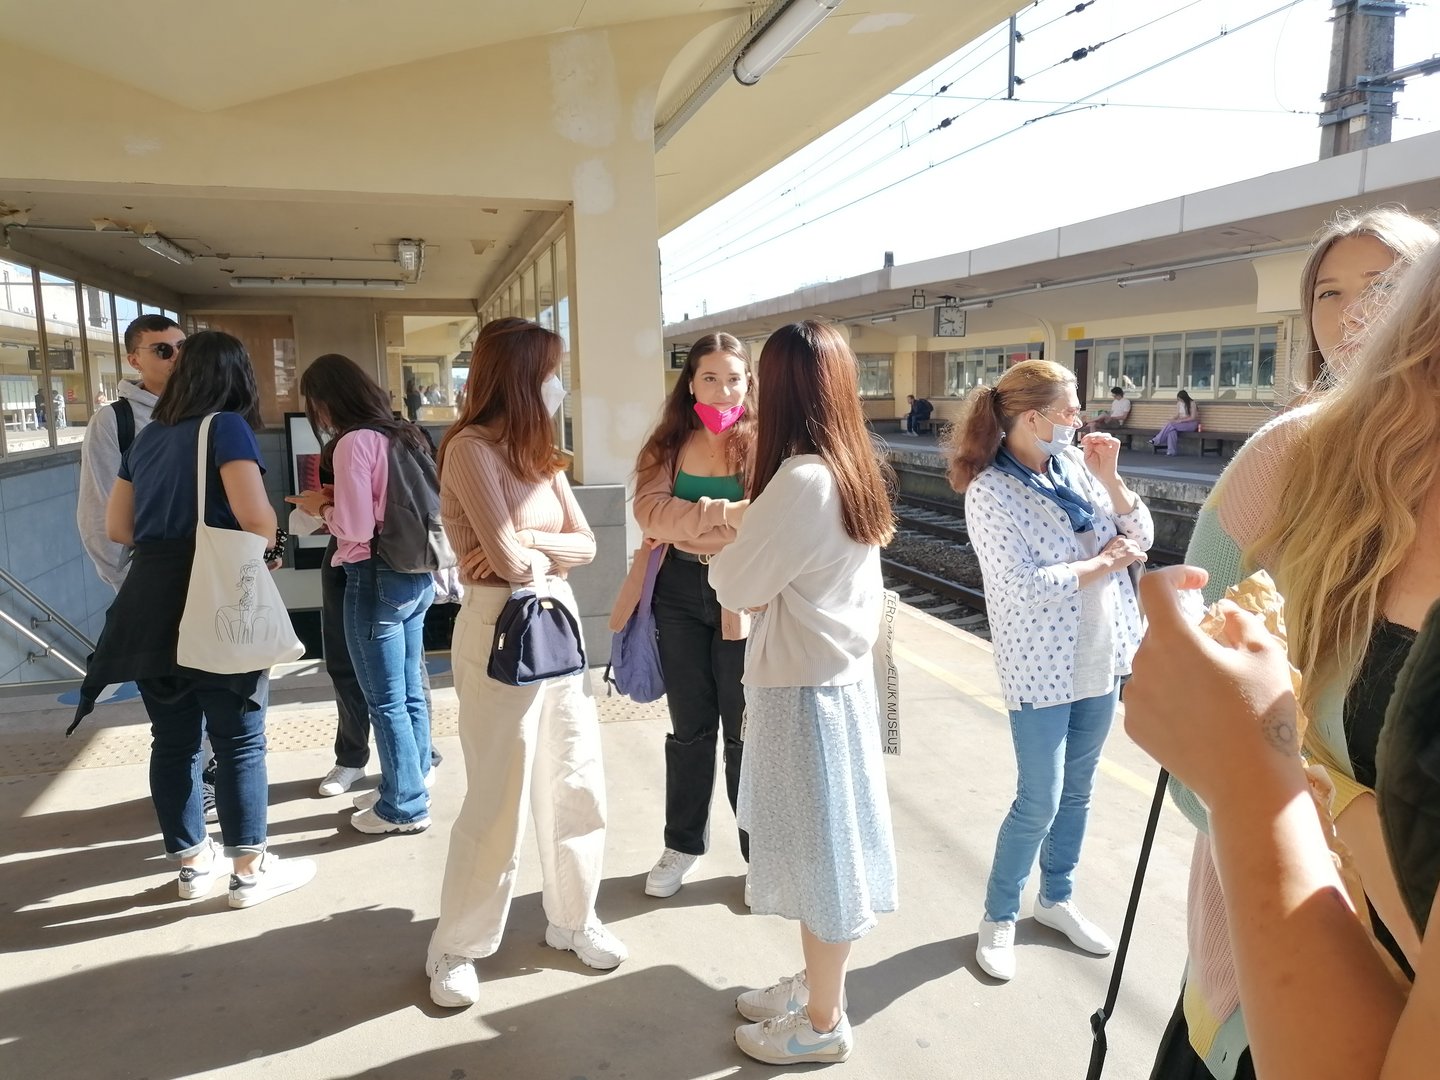 Students at platform waiting for the train